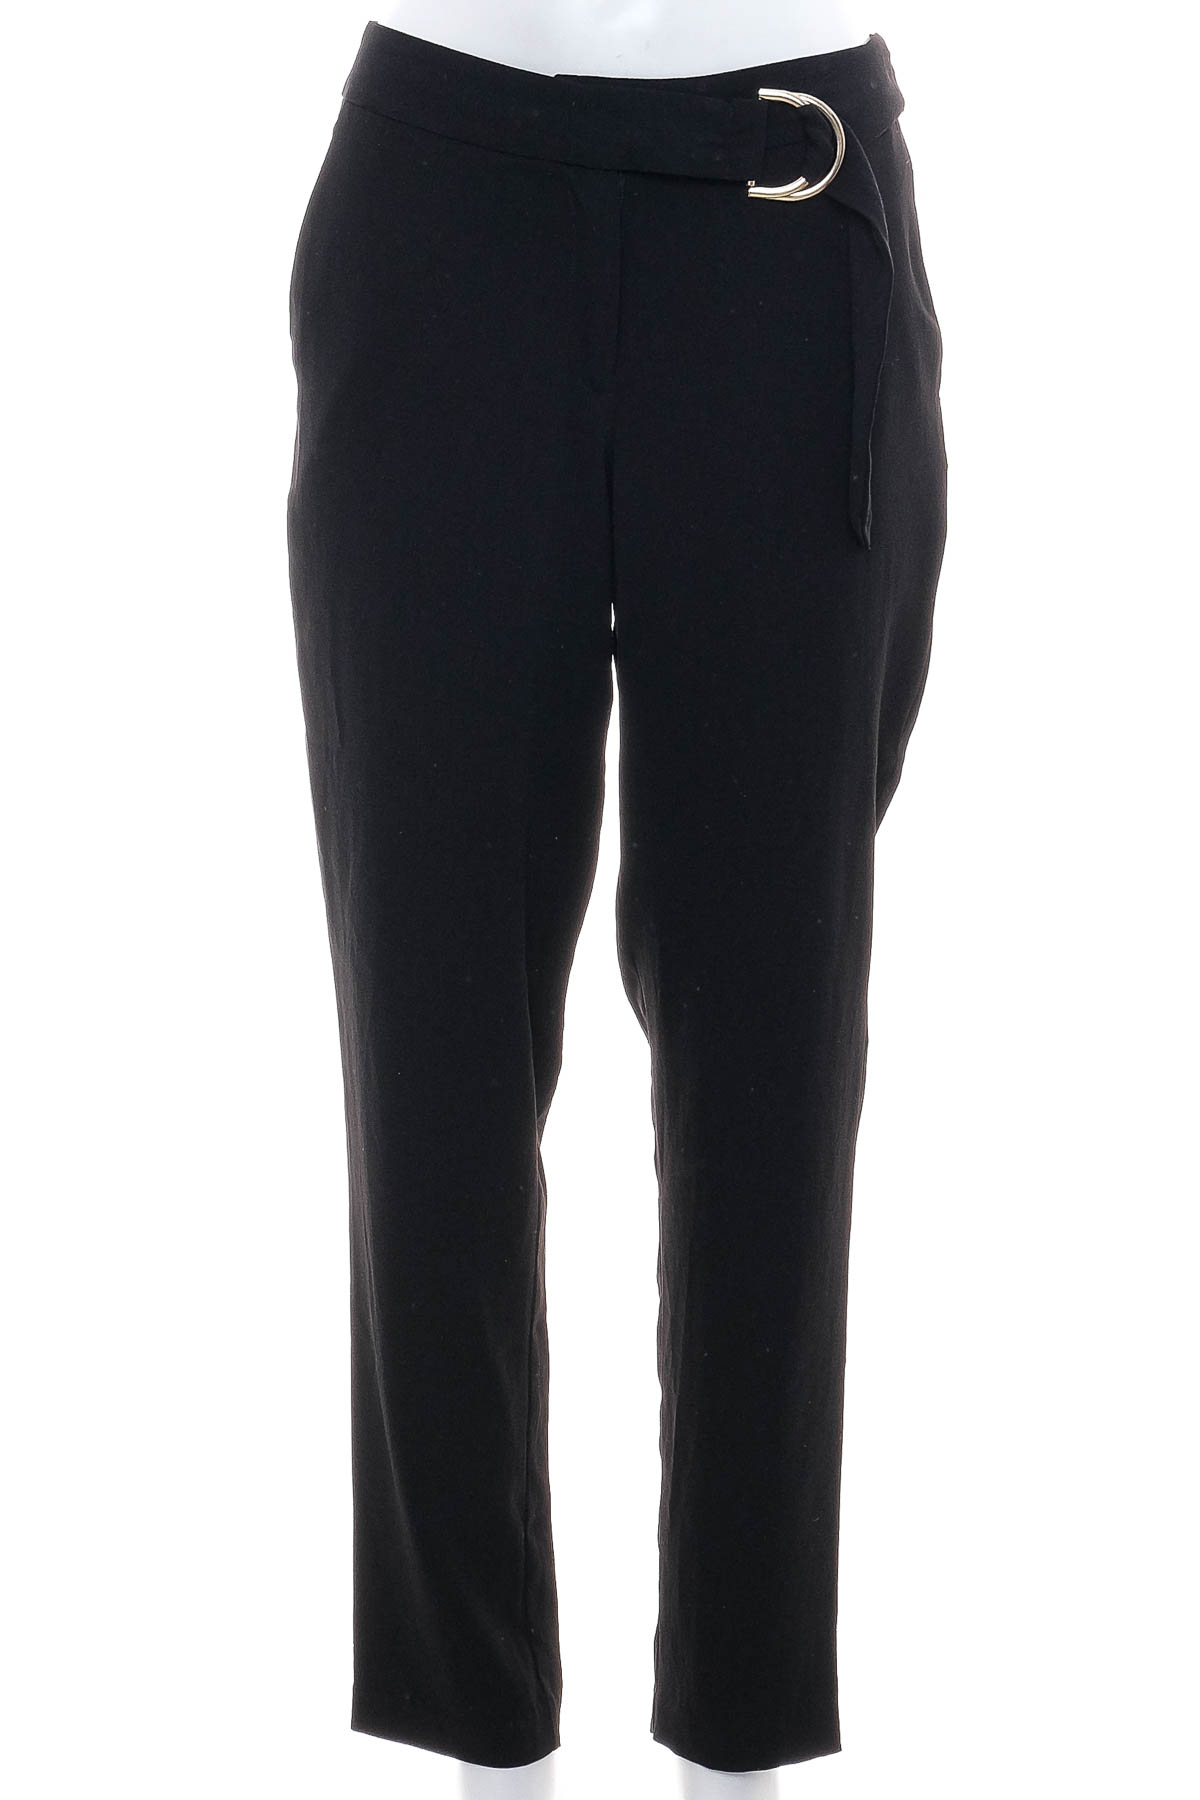 Women's trousers - PREVIEW - 0